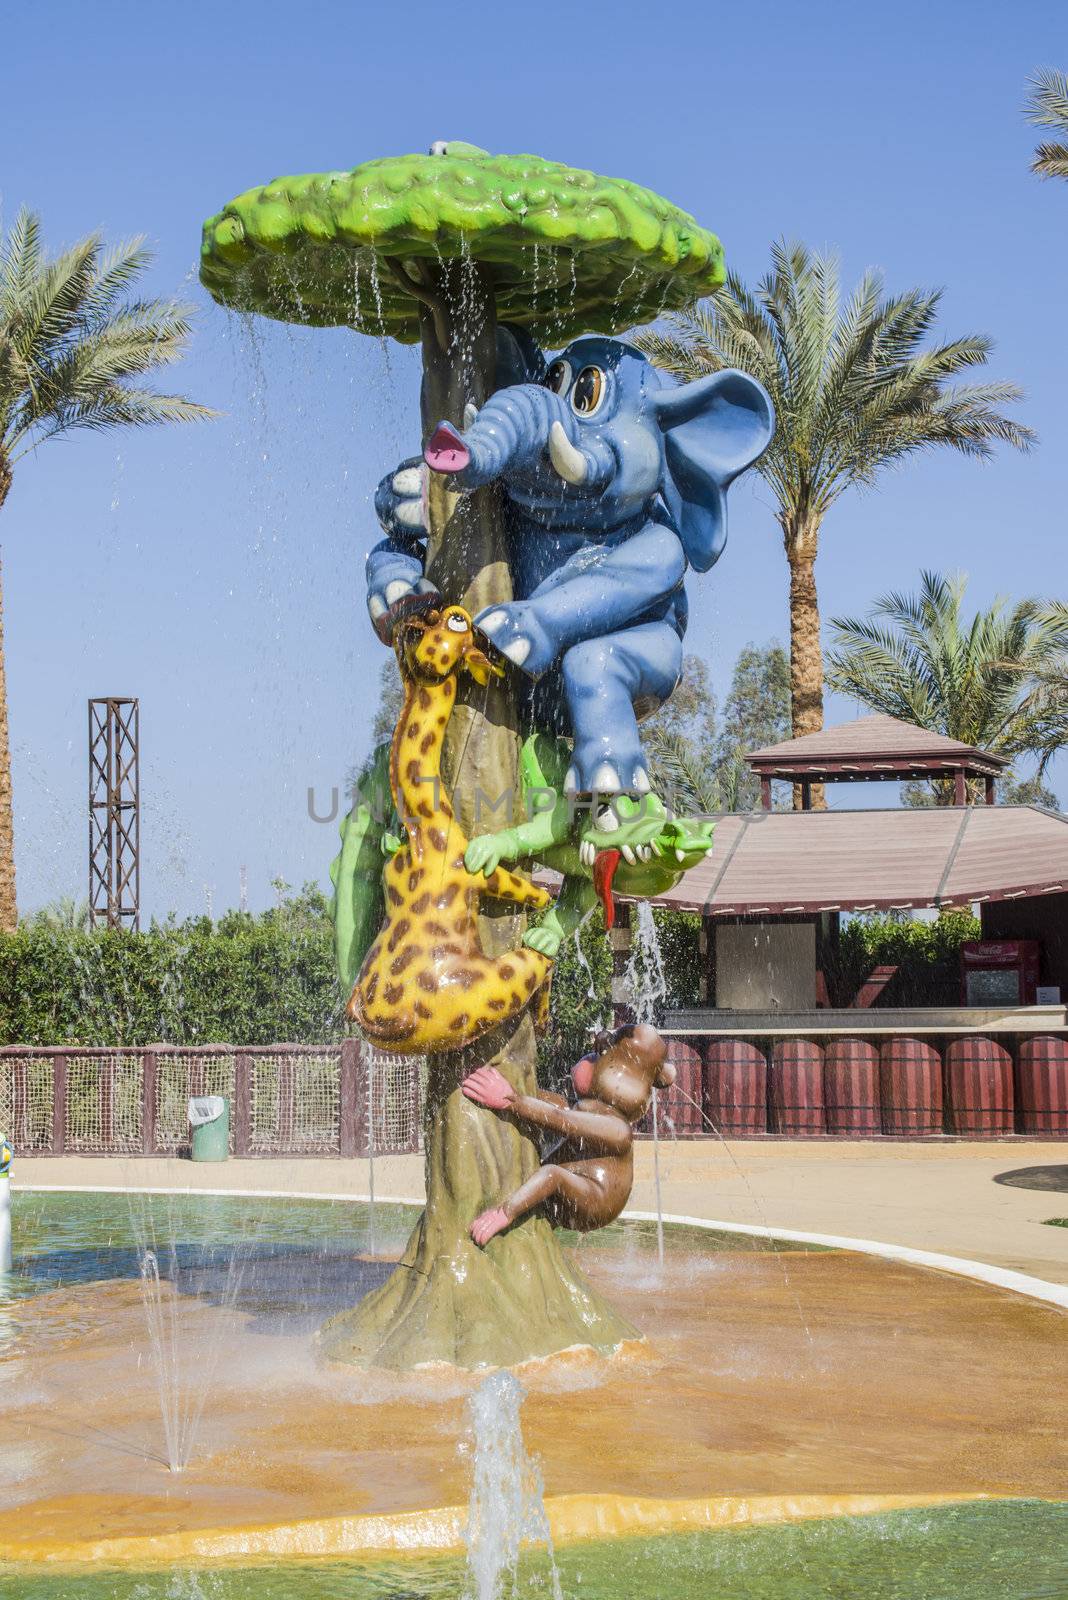 funny characters in a water park by steirus